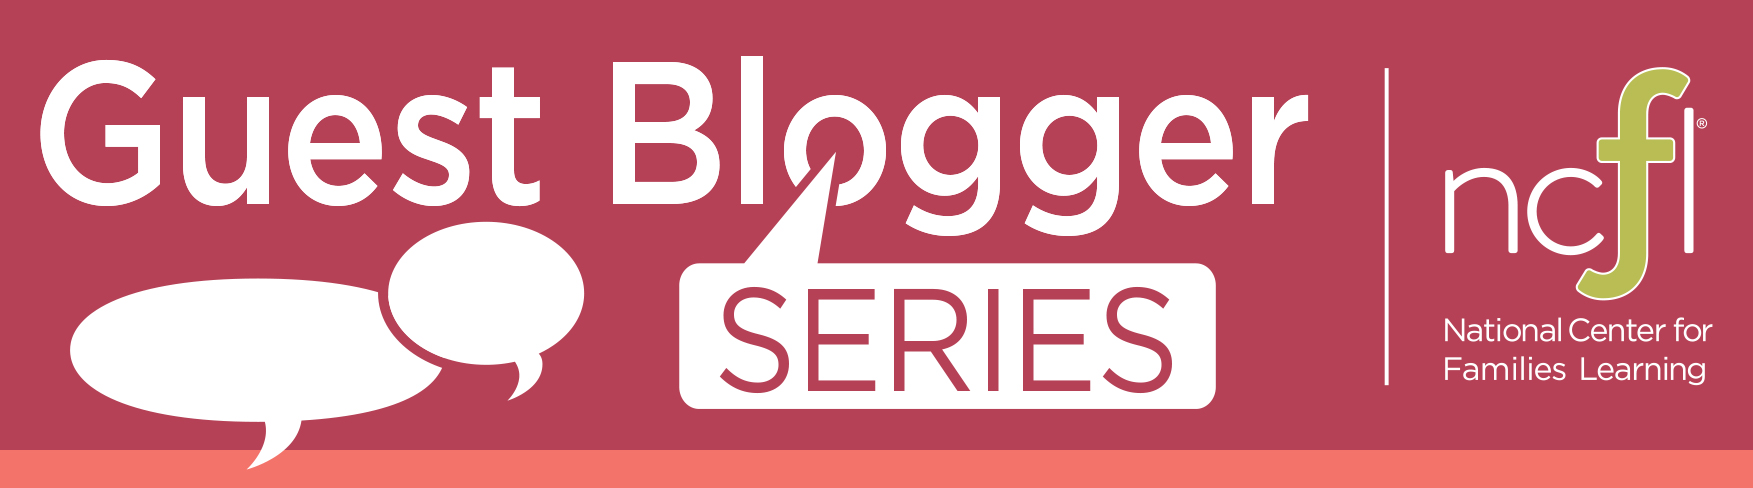 ncfl-guest-blogger-series_graphic